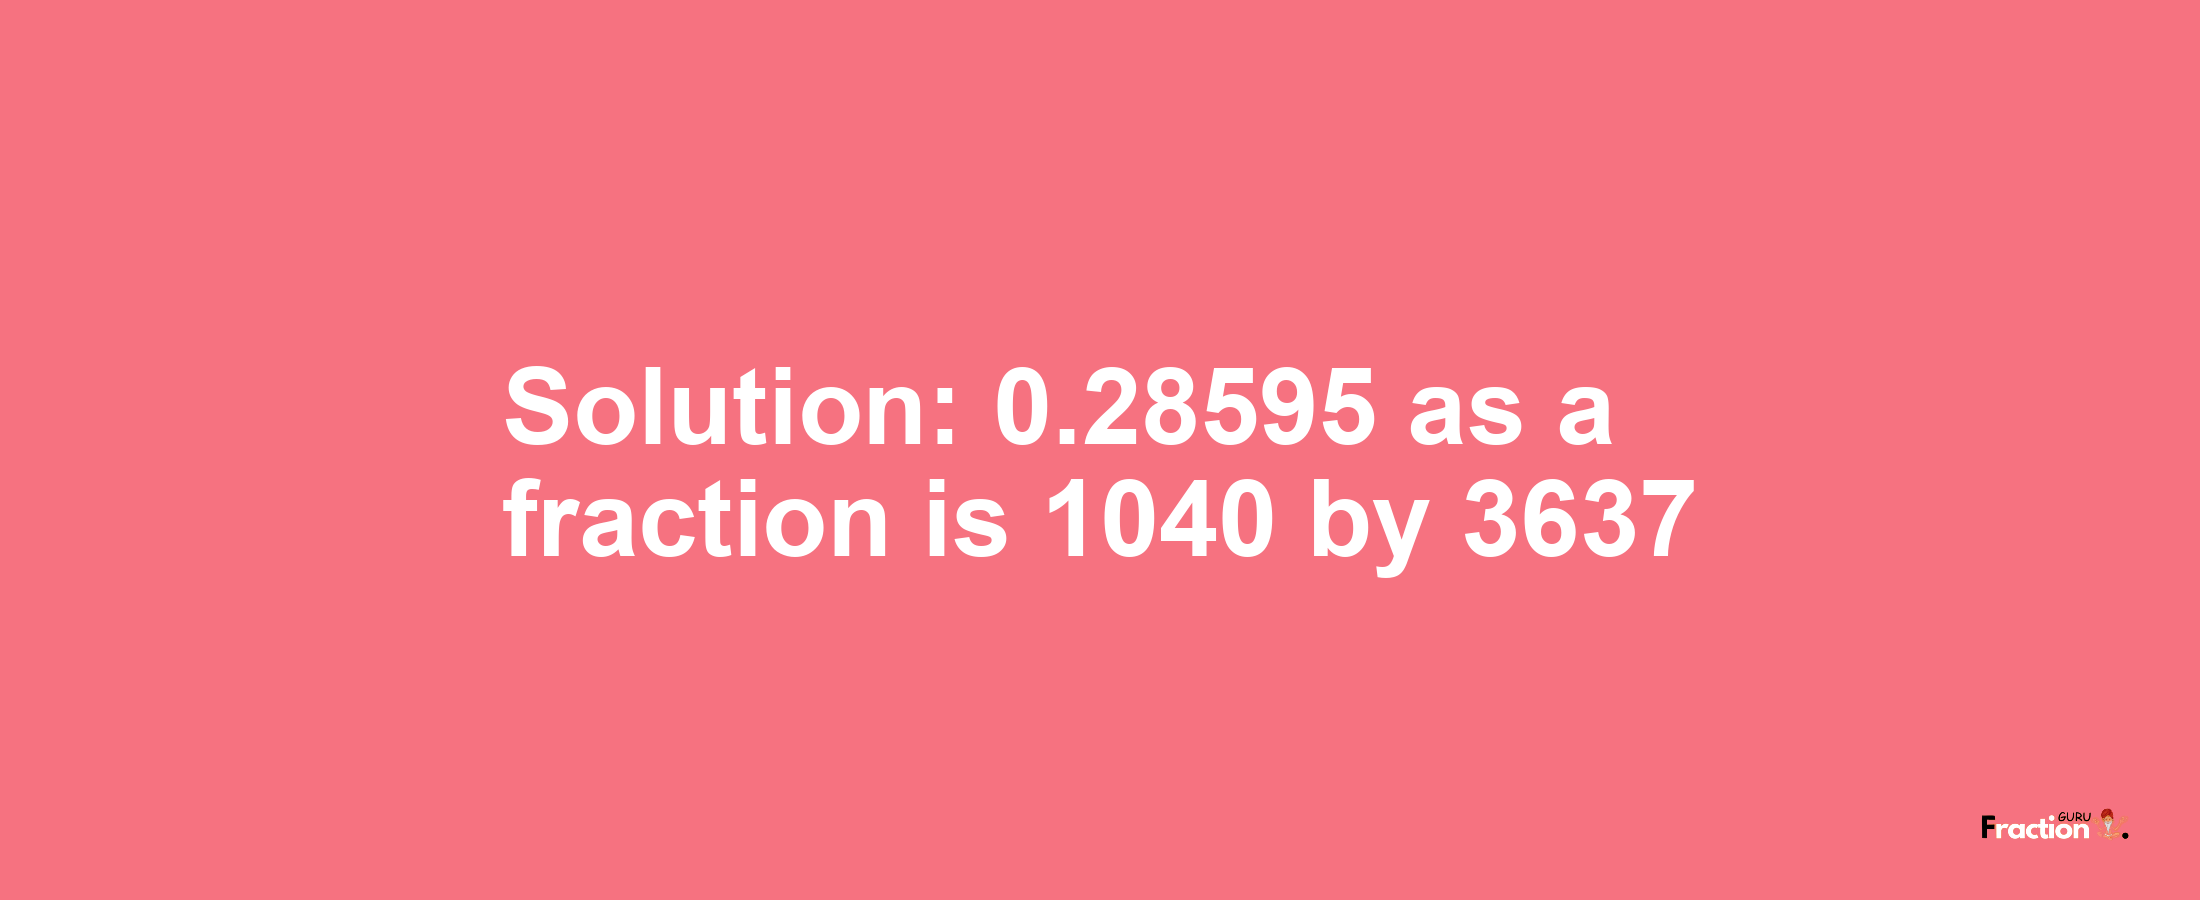 Solution:0.28595 as a fraction is 1040/3637